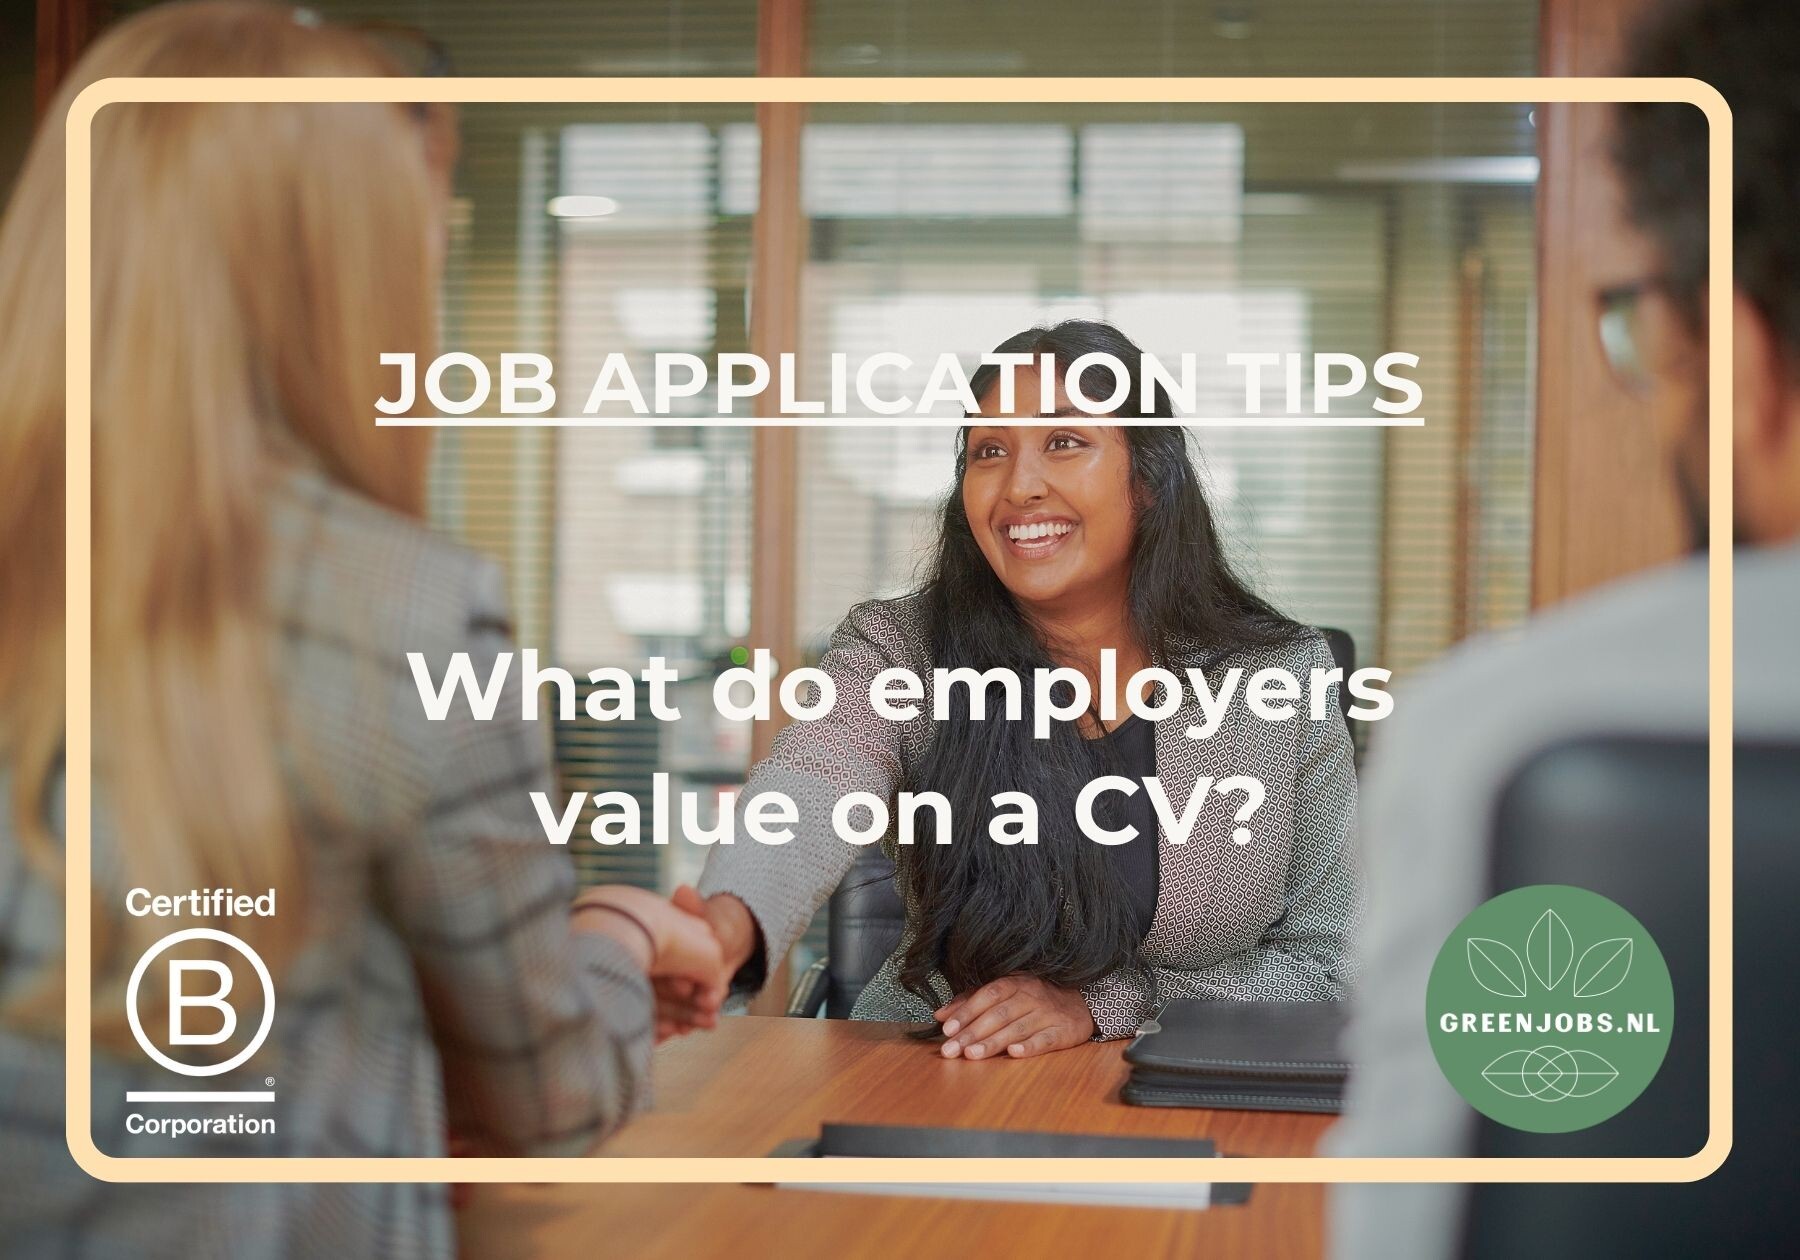 Application tips! What do employers consider important on a CV?